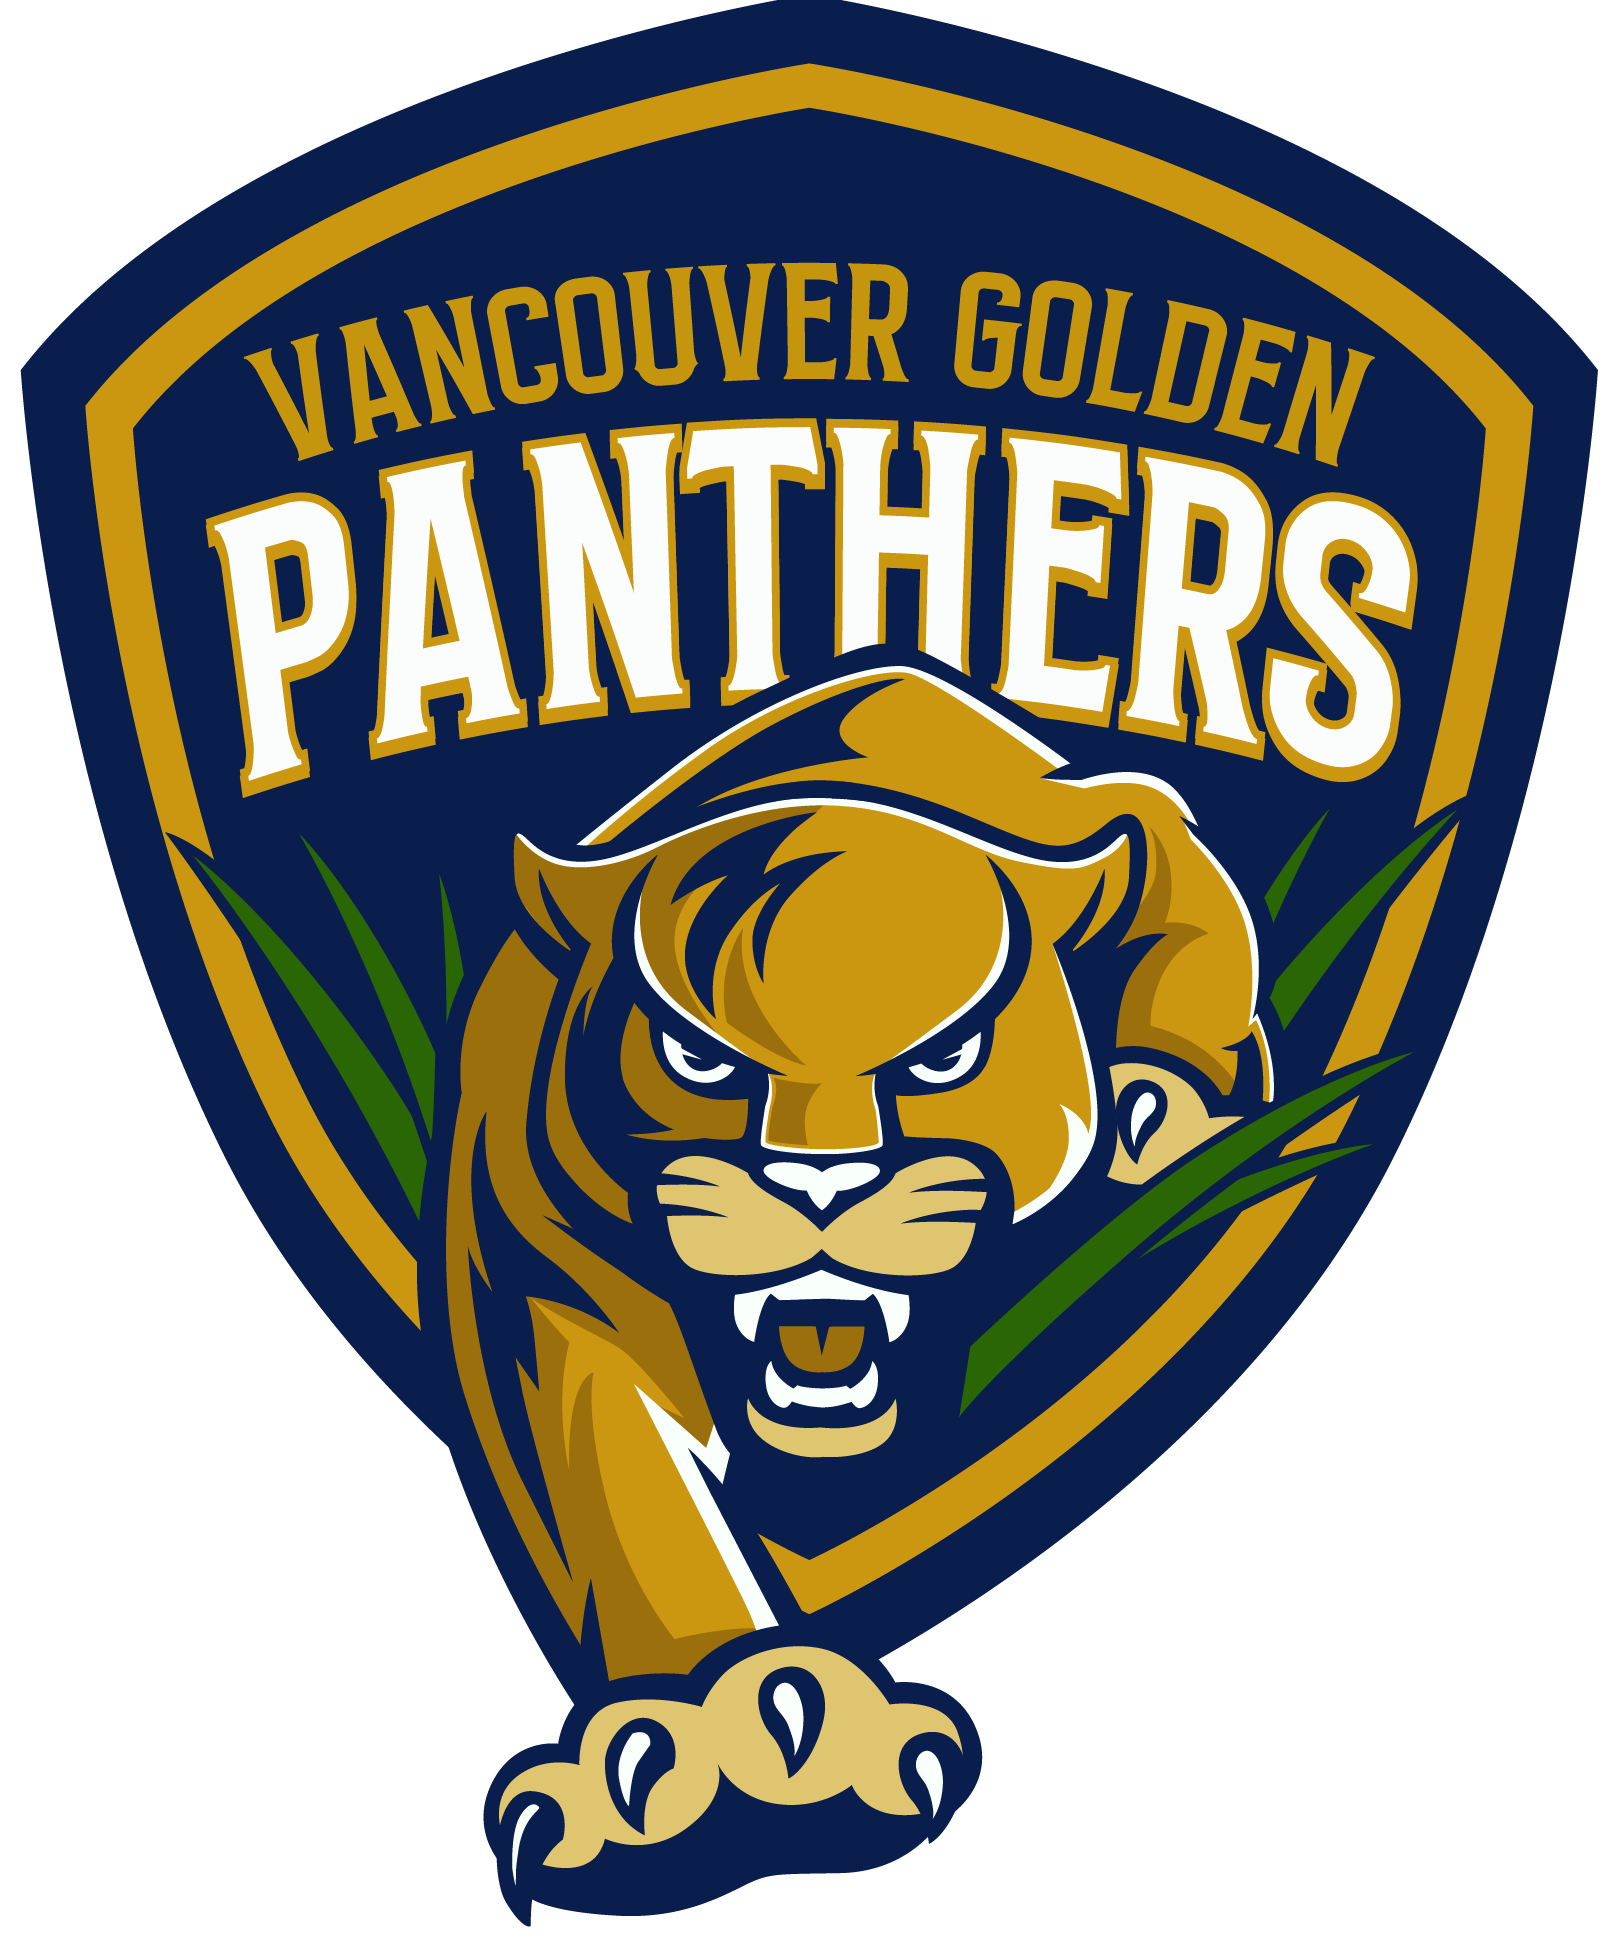 2007 AAA Vancouver Golden Panthers